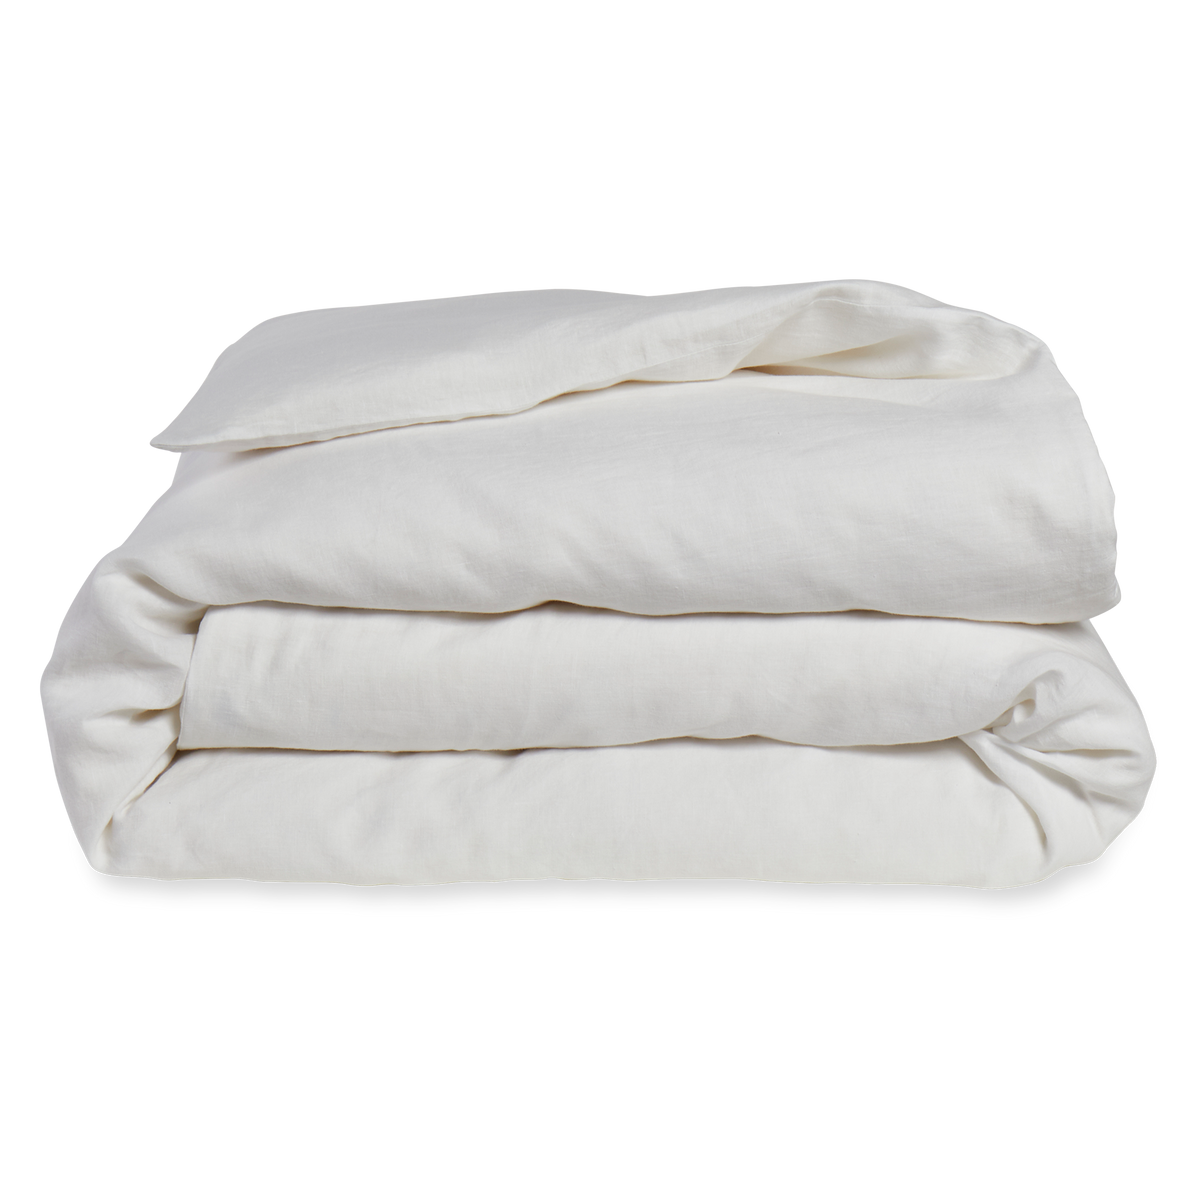 Made in Portugal using the finest French flax linen and stonewashed for a relaxed, perfectly imperfect look, this Duvet Cover is light, breathable, and softer with every sleep.